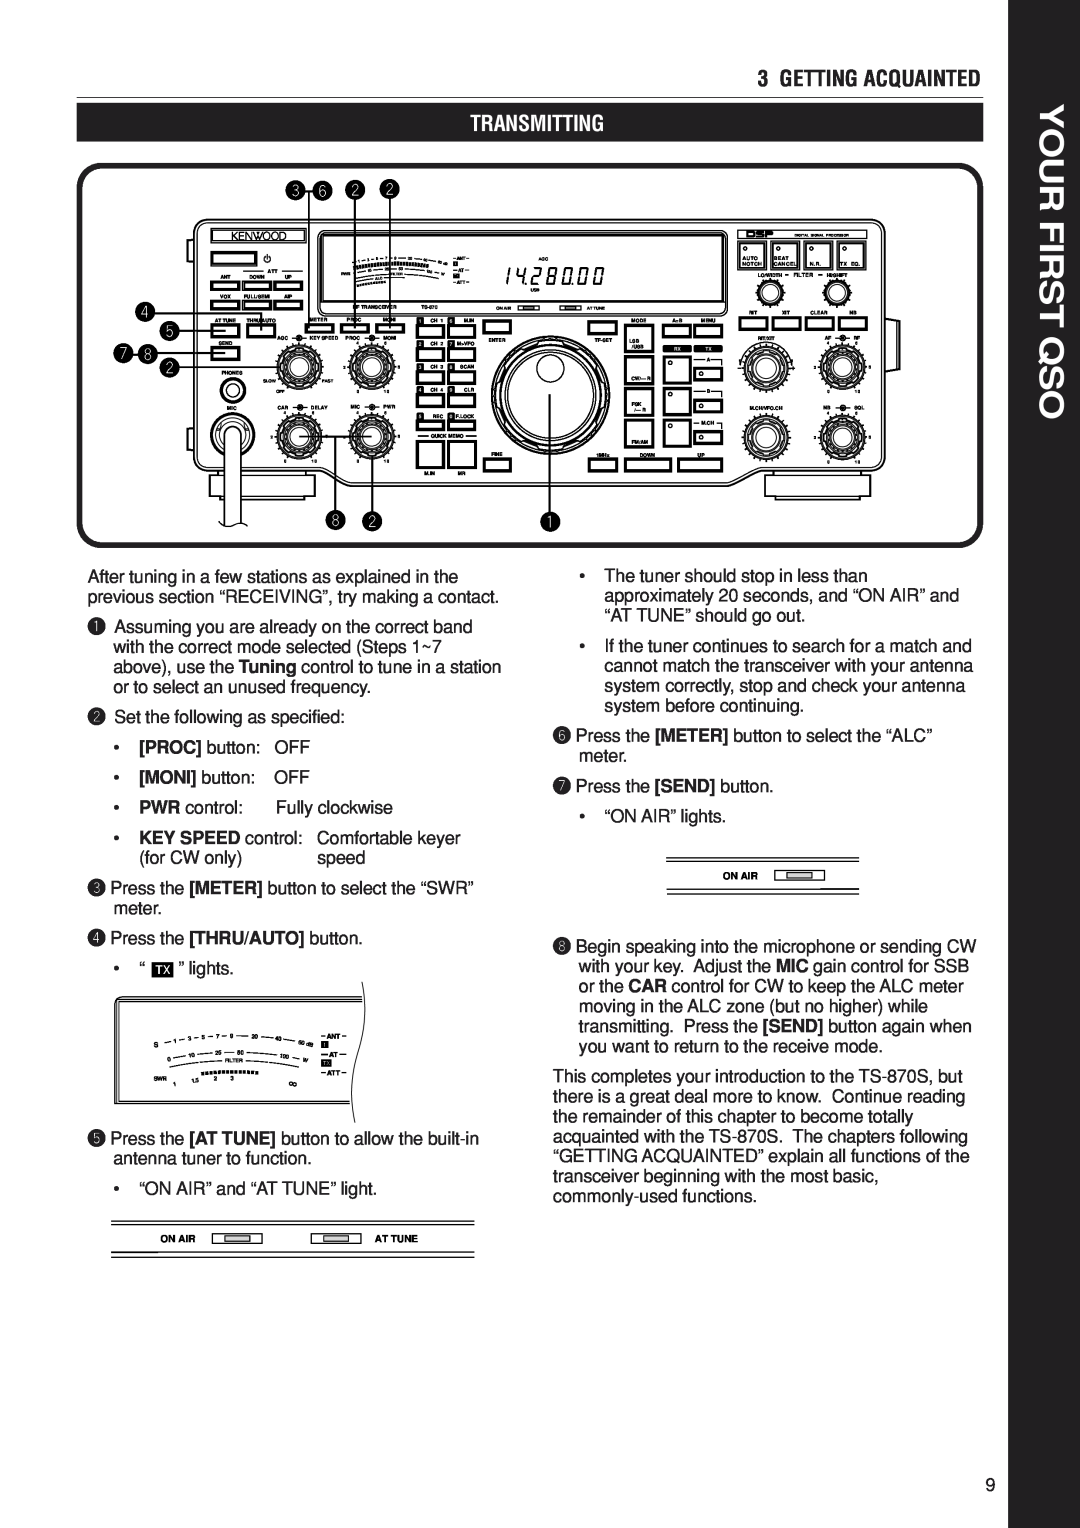 Kenwood TS-870S instruction manual First Qso, Transmitting, Your, Getting Acquainted, e y w w 